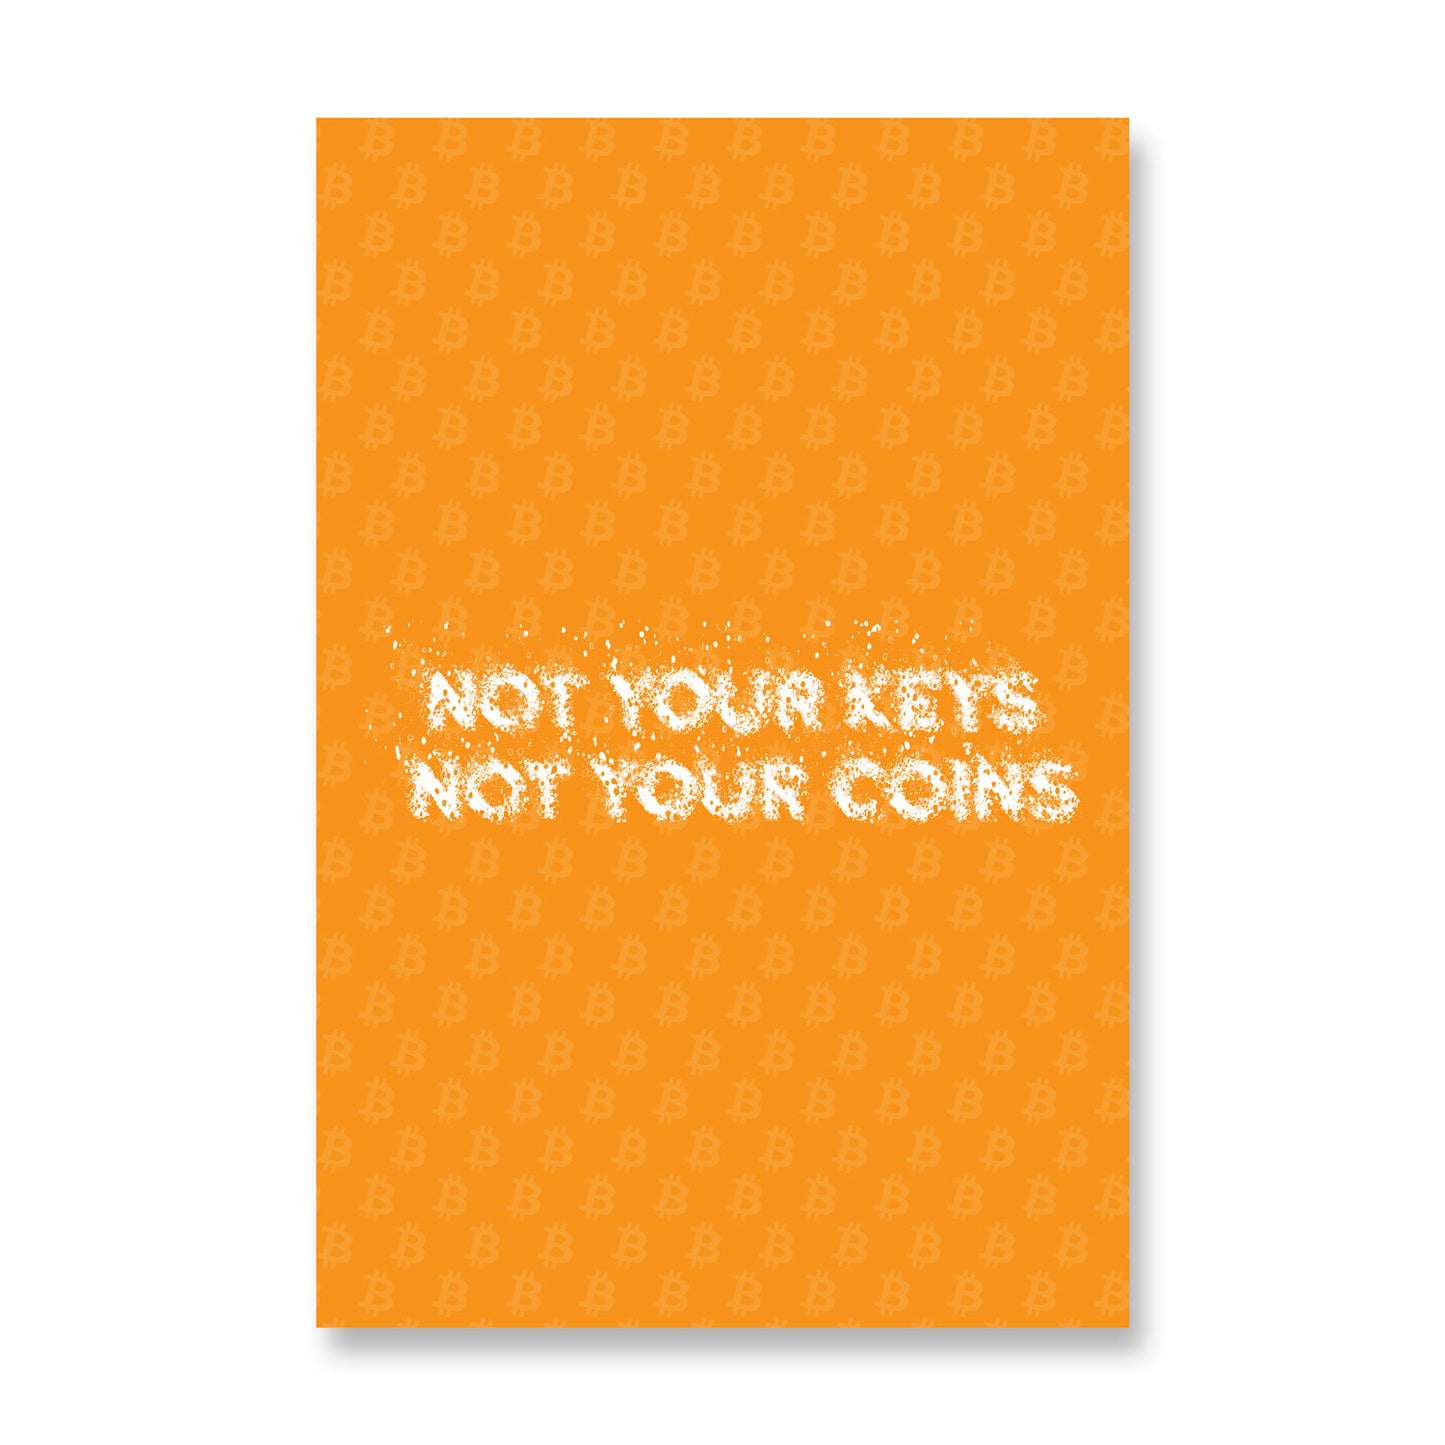 bitcoin poster not your keys not your coins artwork crypto wall art